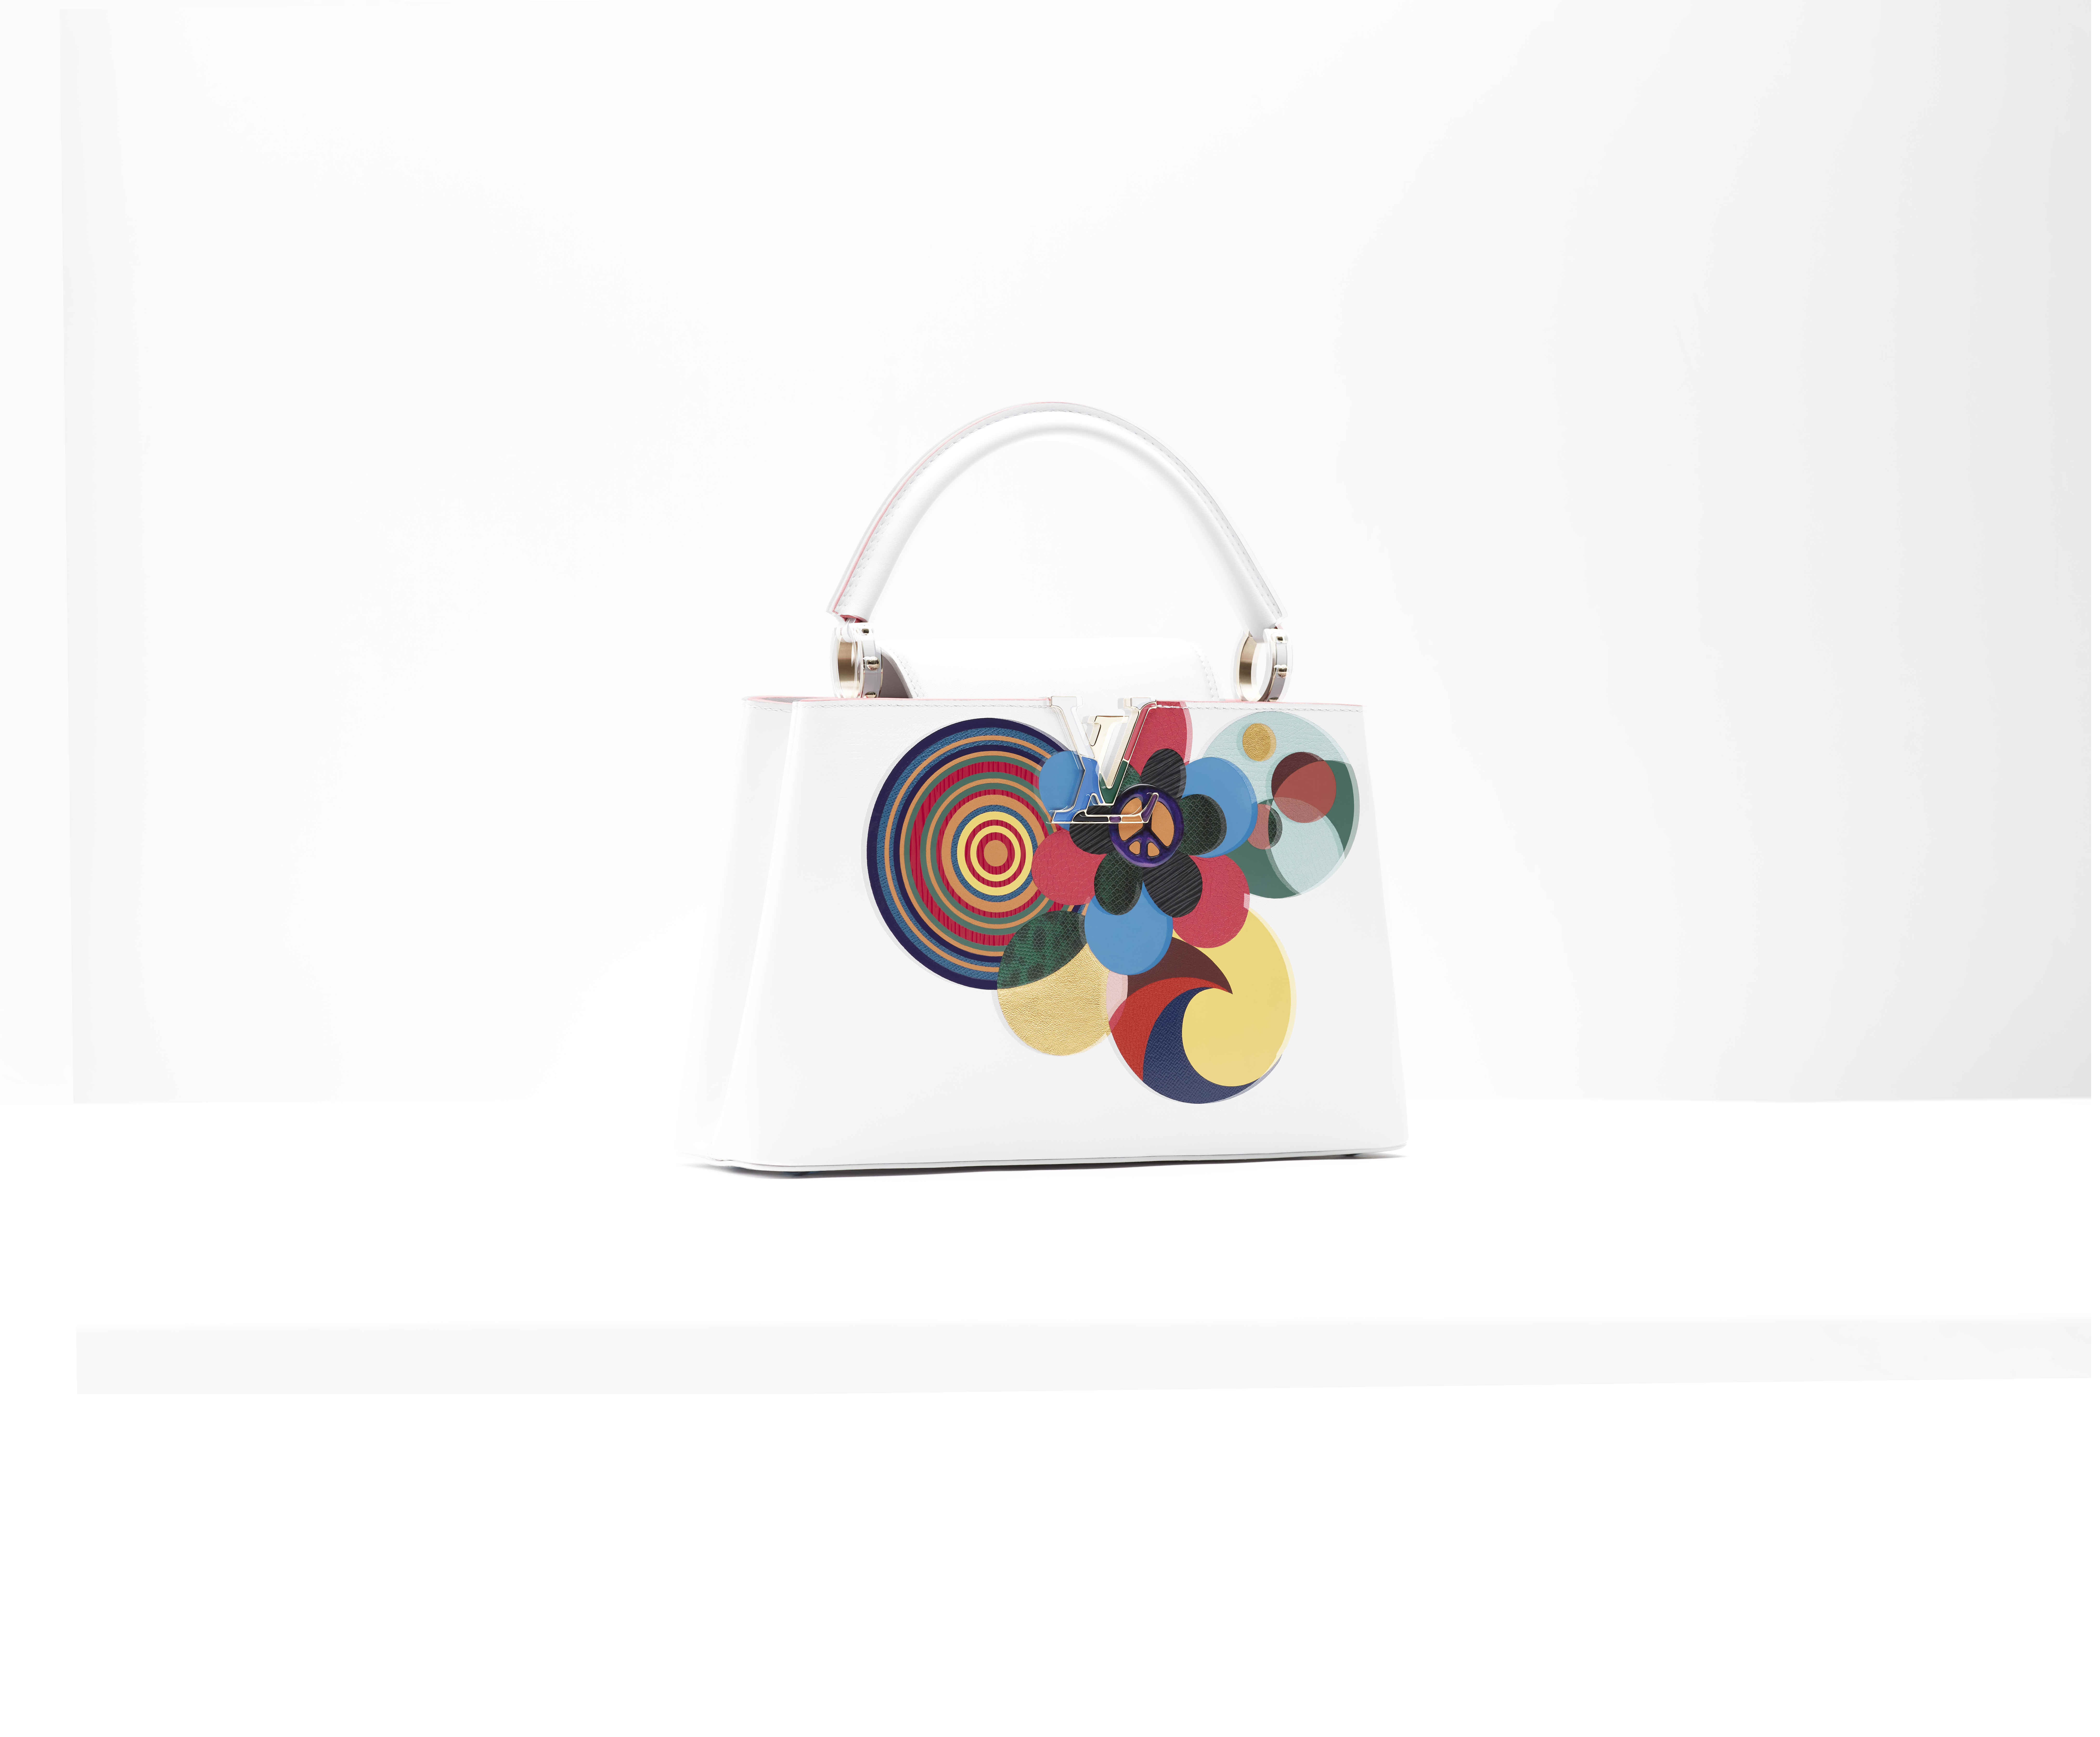 Louis Vuitton Launches the 2023 ArtyCapucines Collection with Five